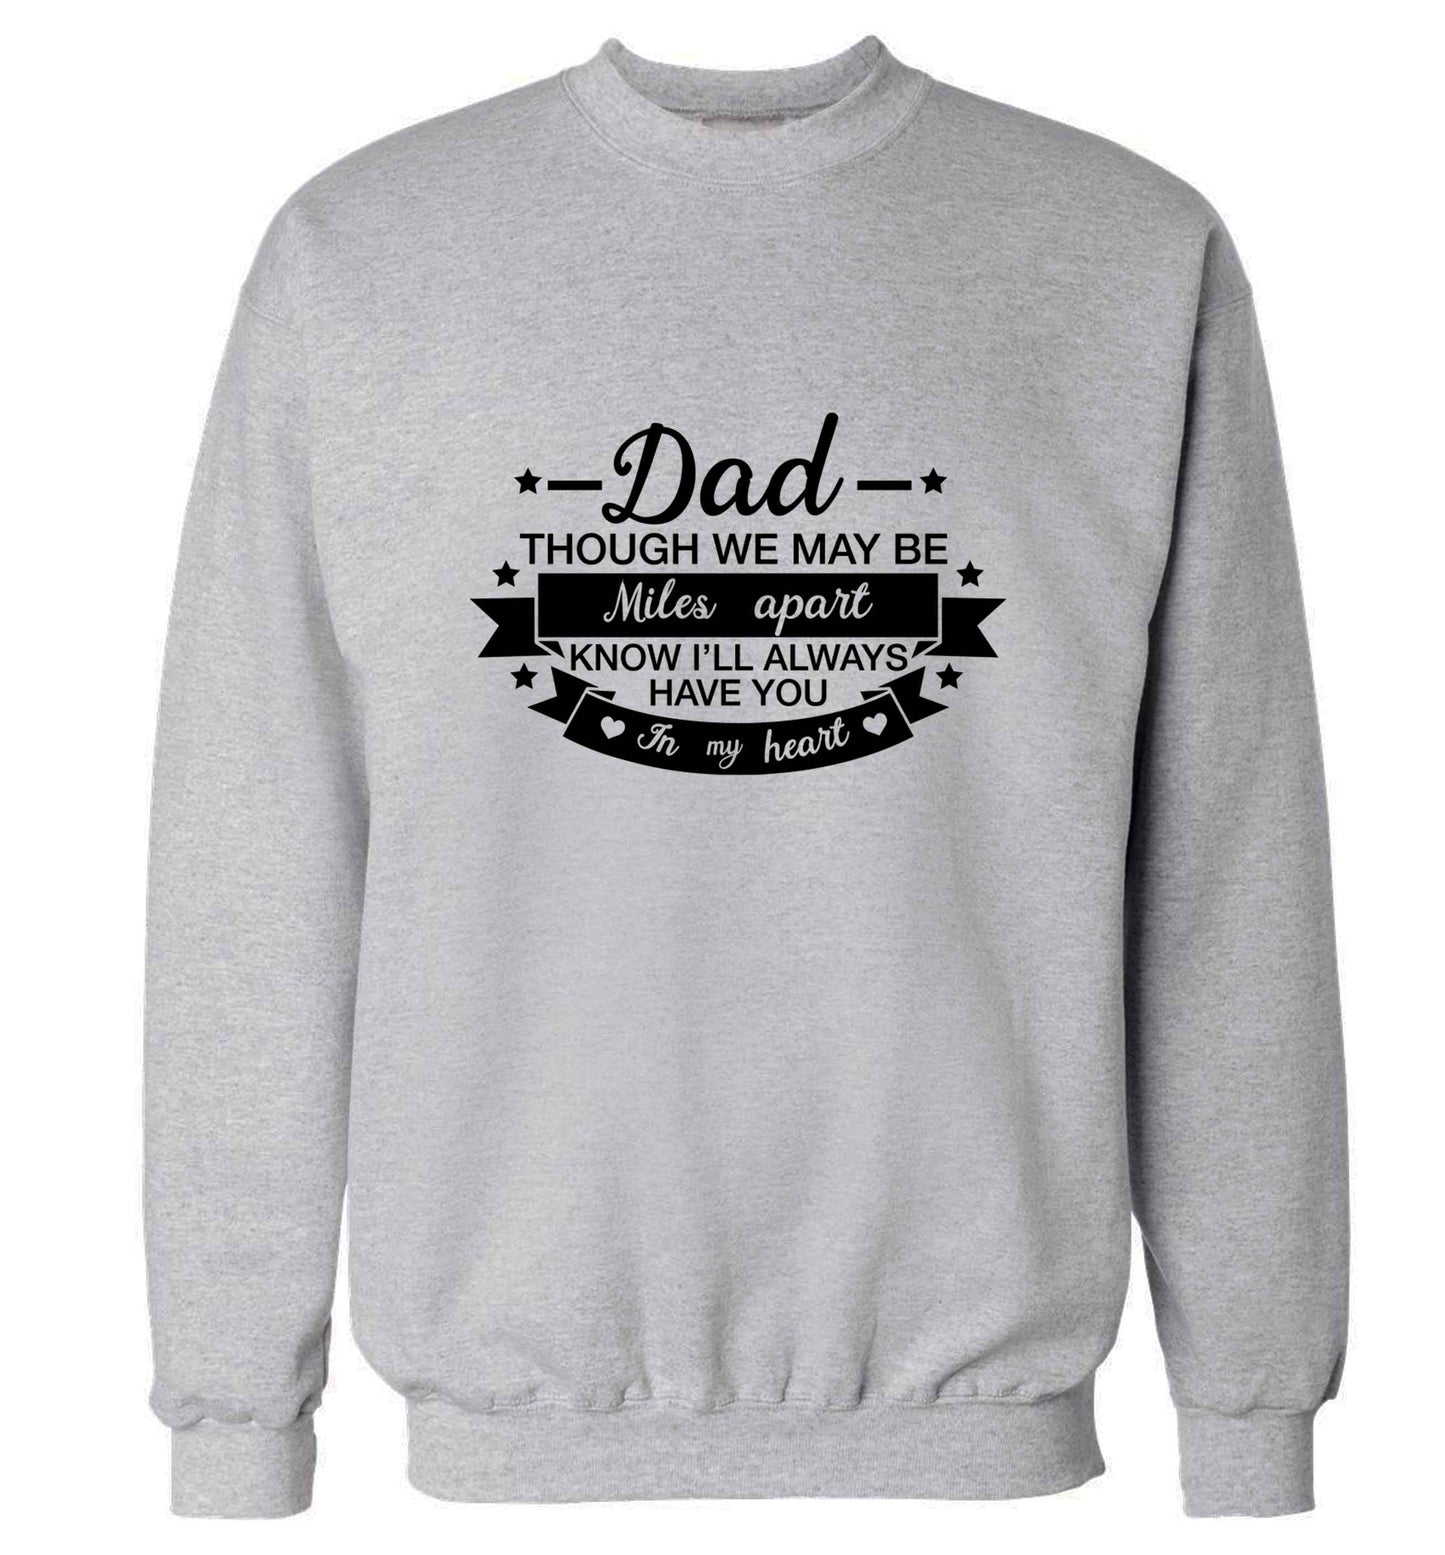 Dad though we are miles apart know I'll always have you in my heart adult's unisex grey sweater 2XL